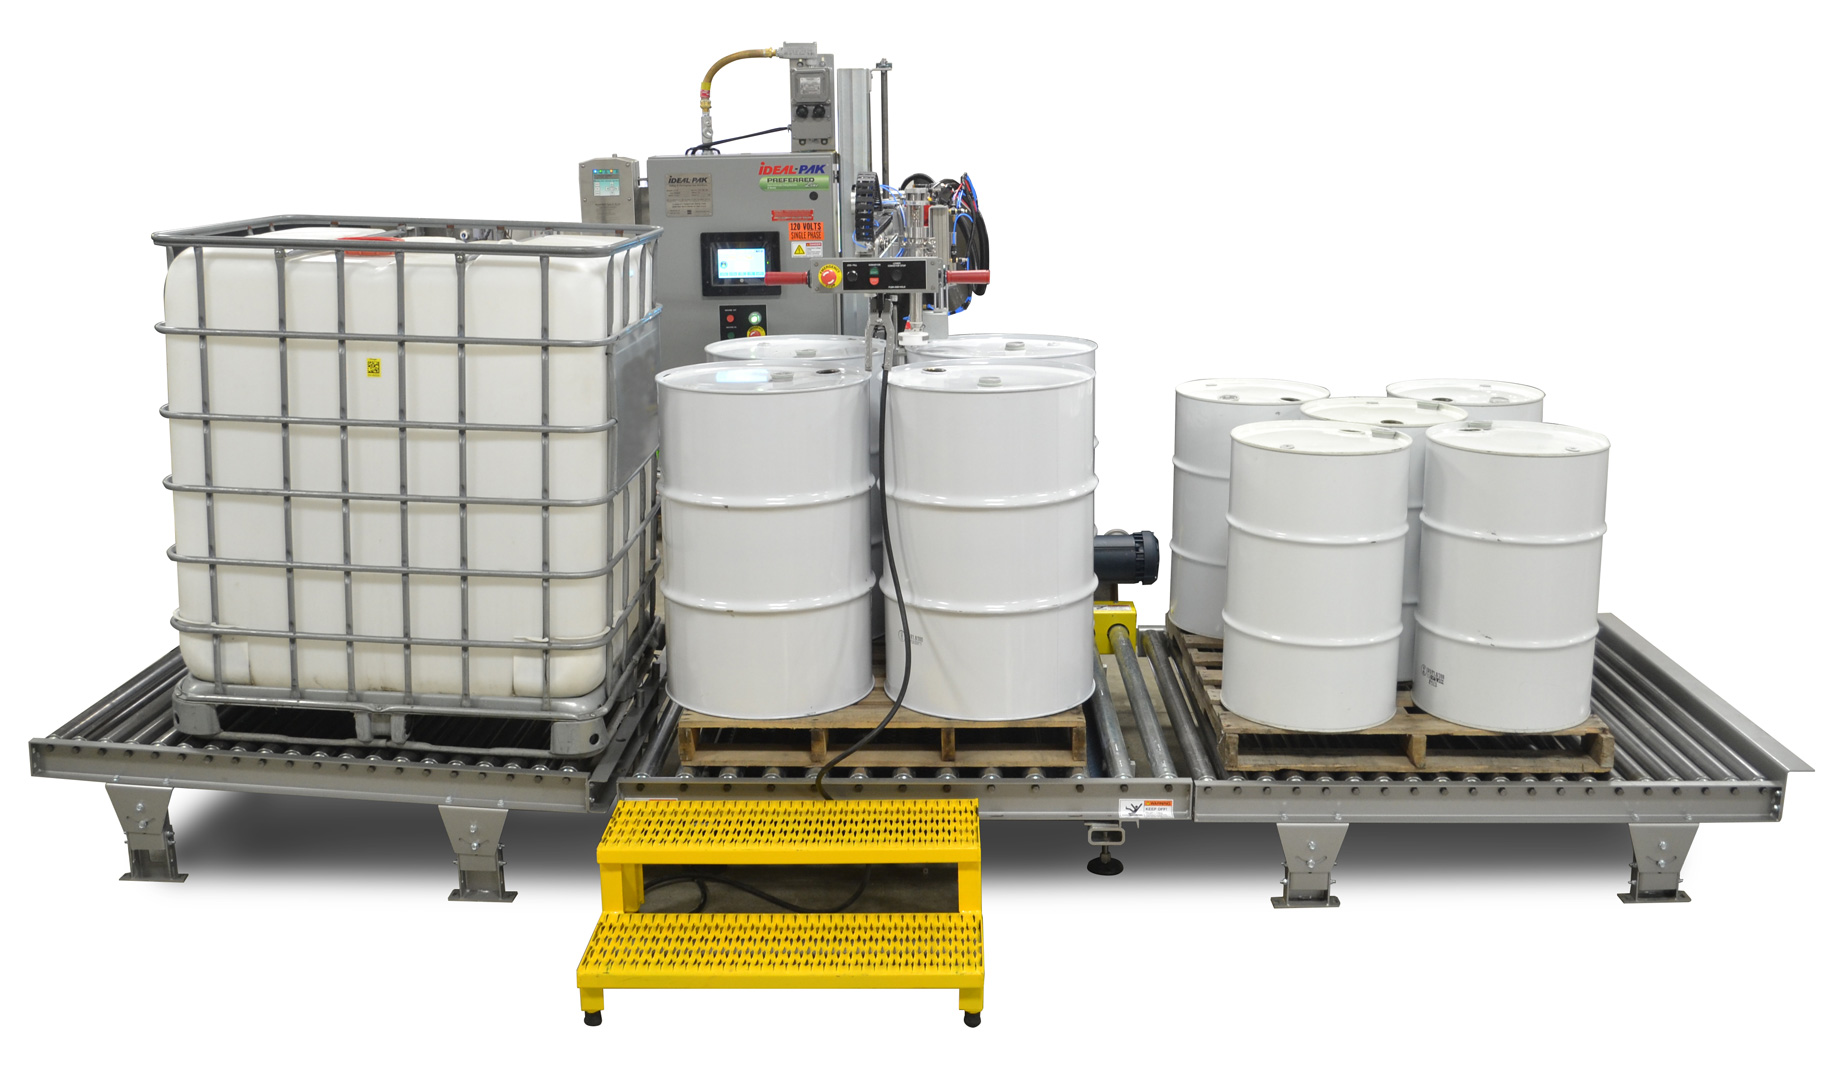 Inside Fill Semi-automatic net weight liquid filler for Totes and drums with optional Ground Interlock